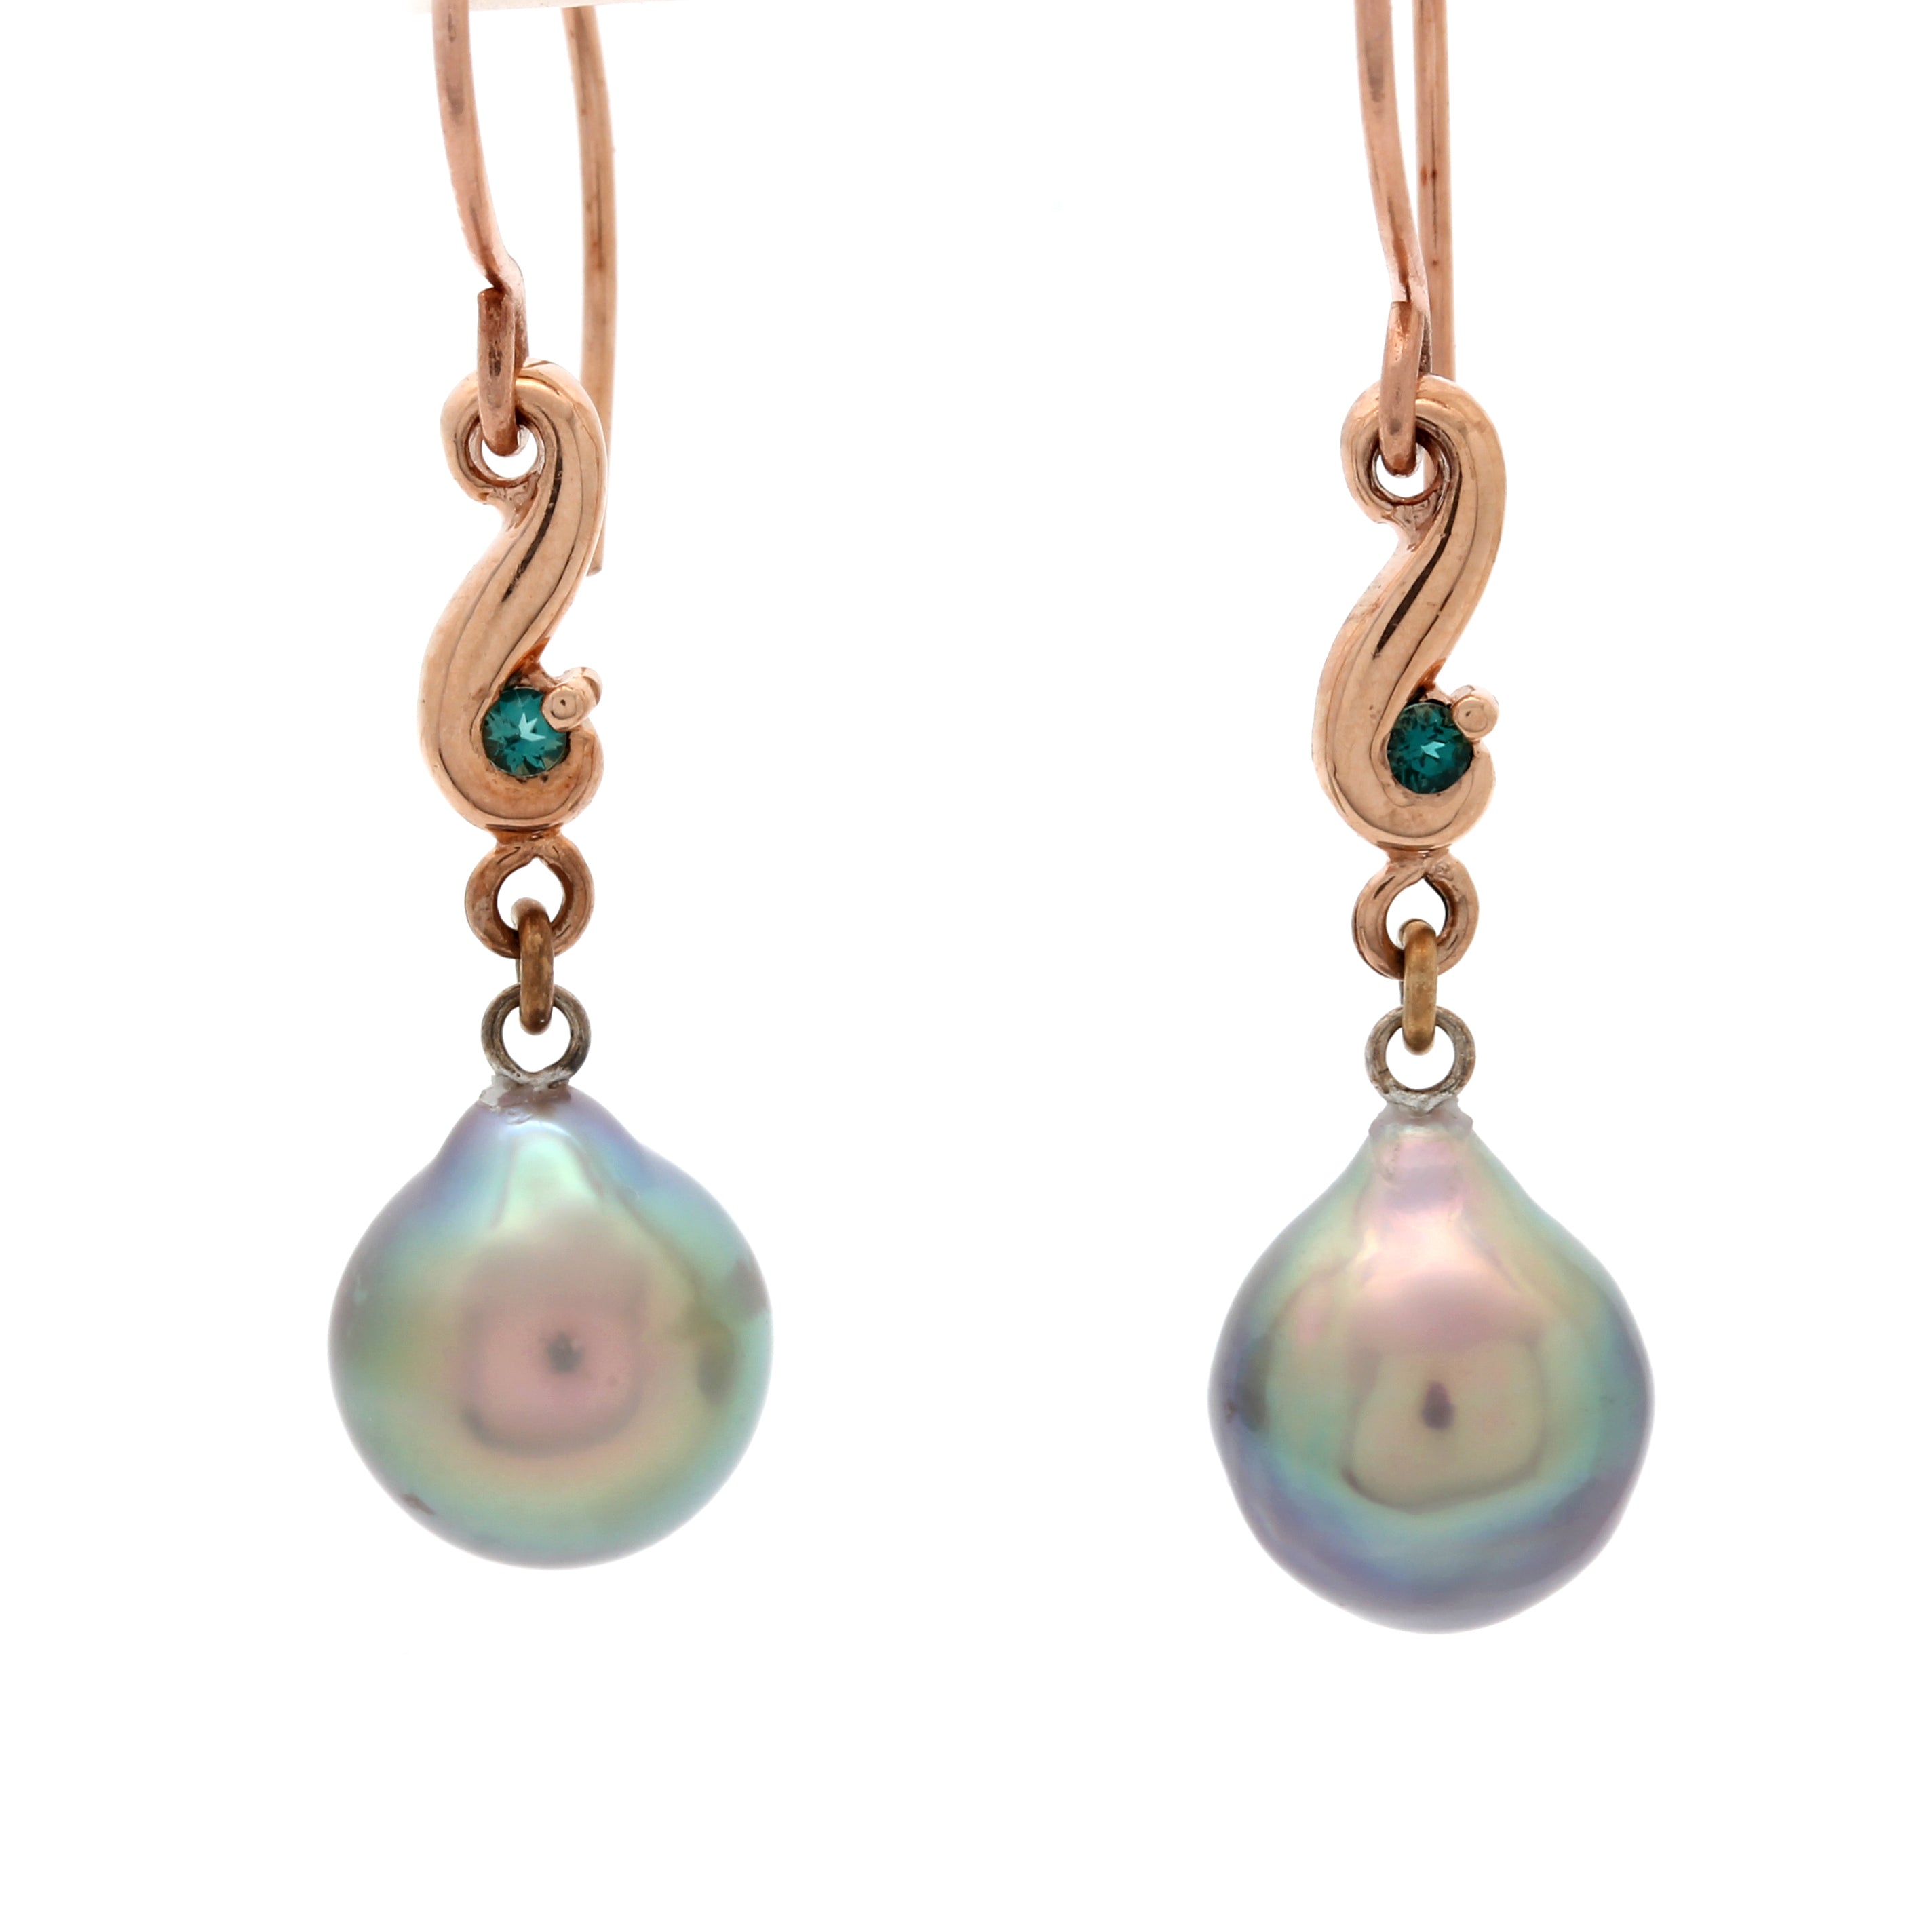 Gorgeous Green Cortez Pearls on 14K Rose Gold Earrings with Green/Blue Lazulite by Kathe Mai